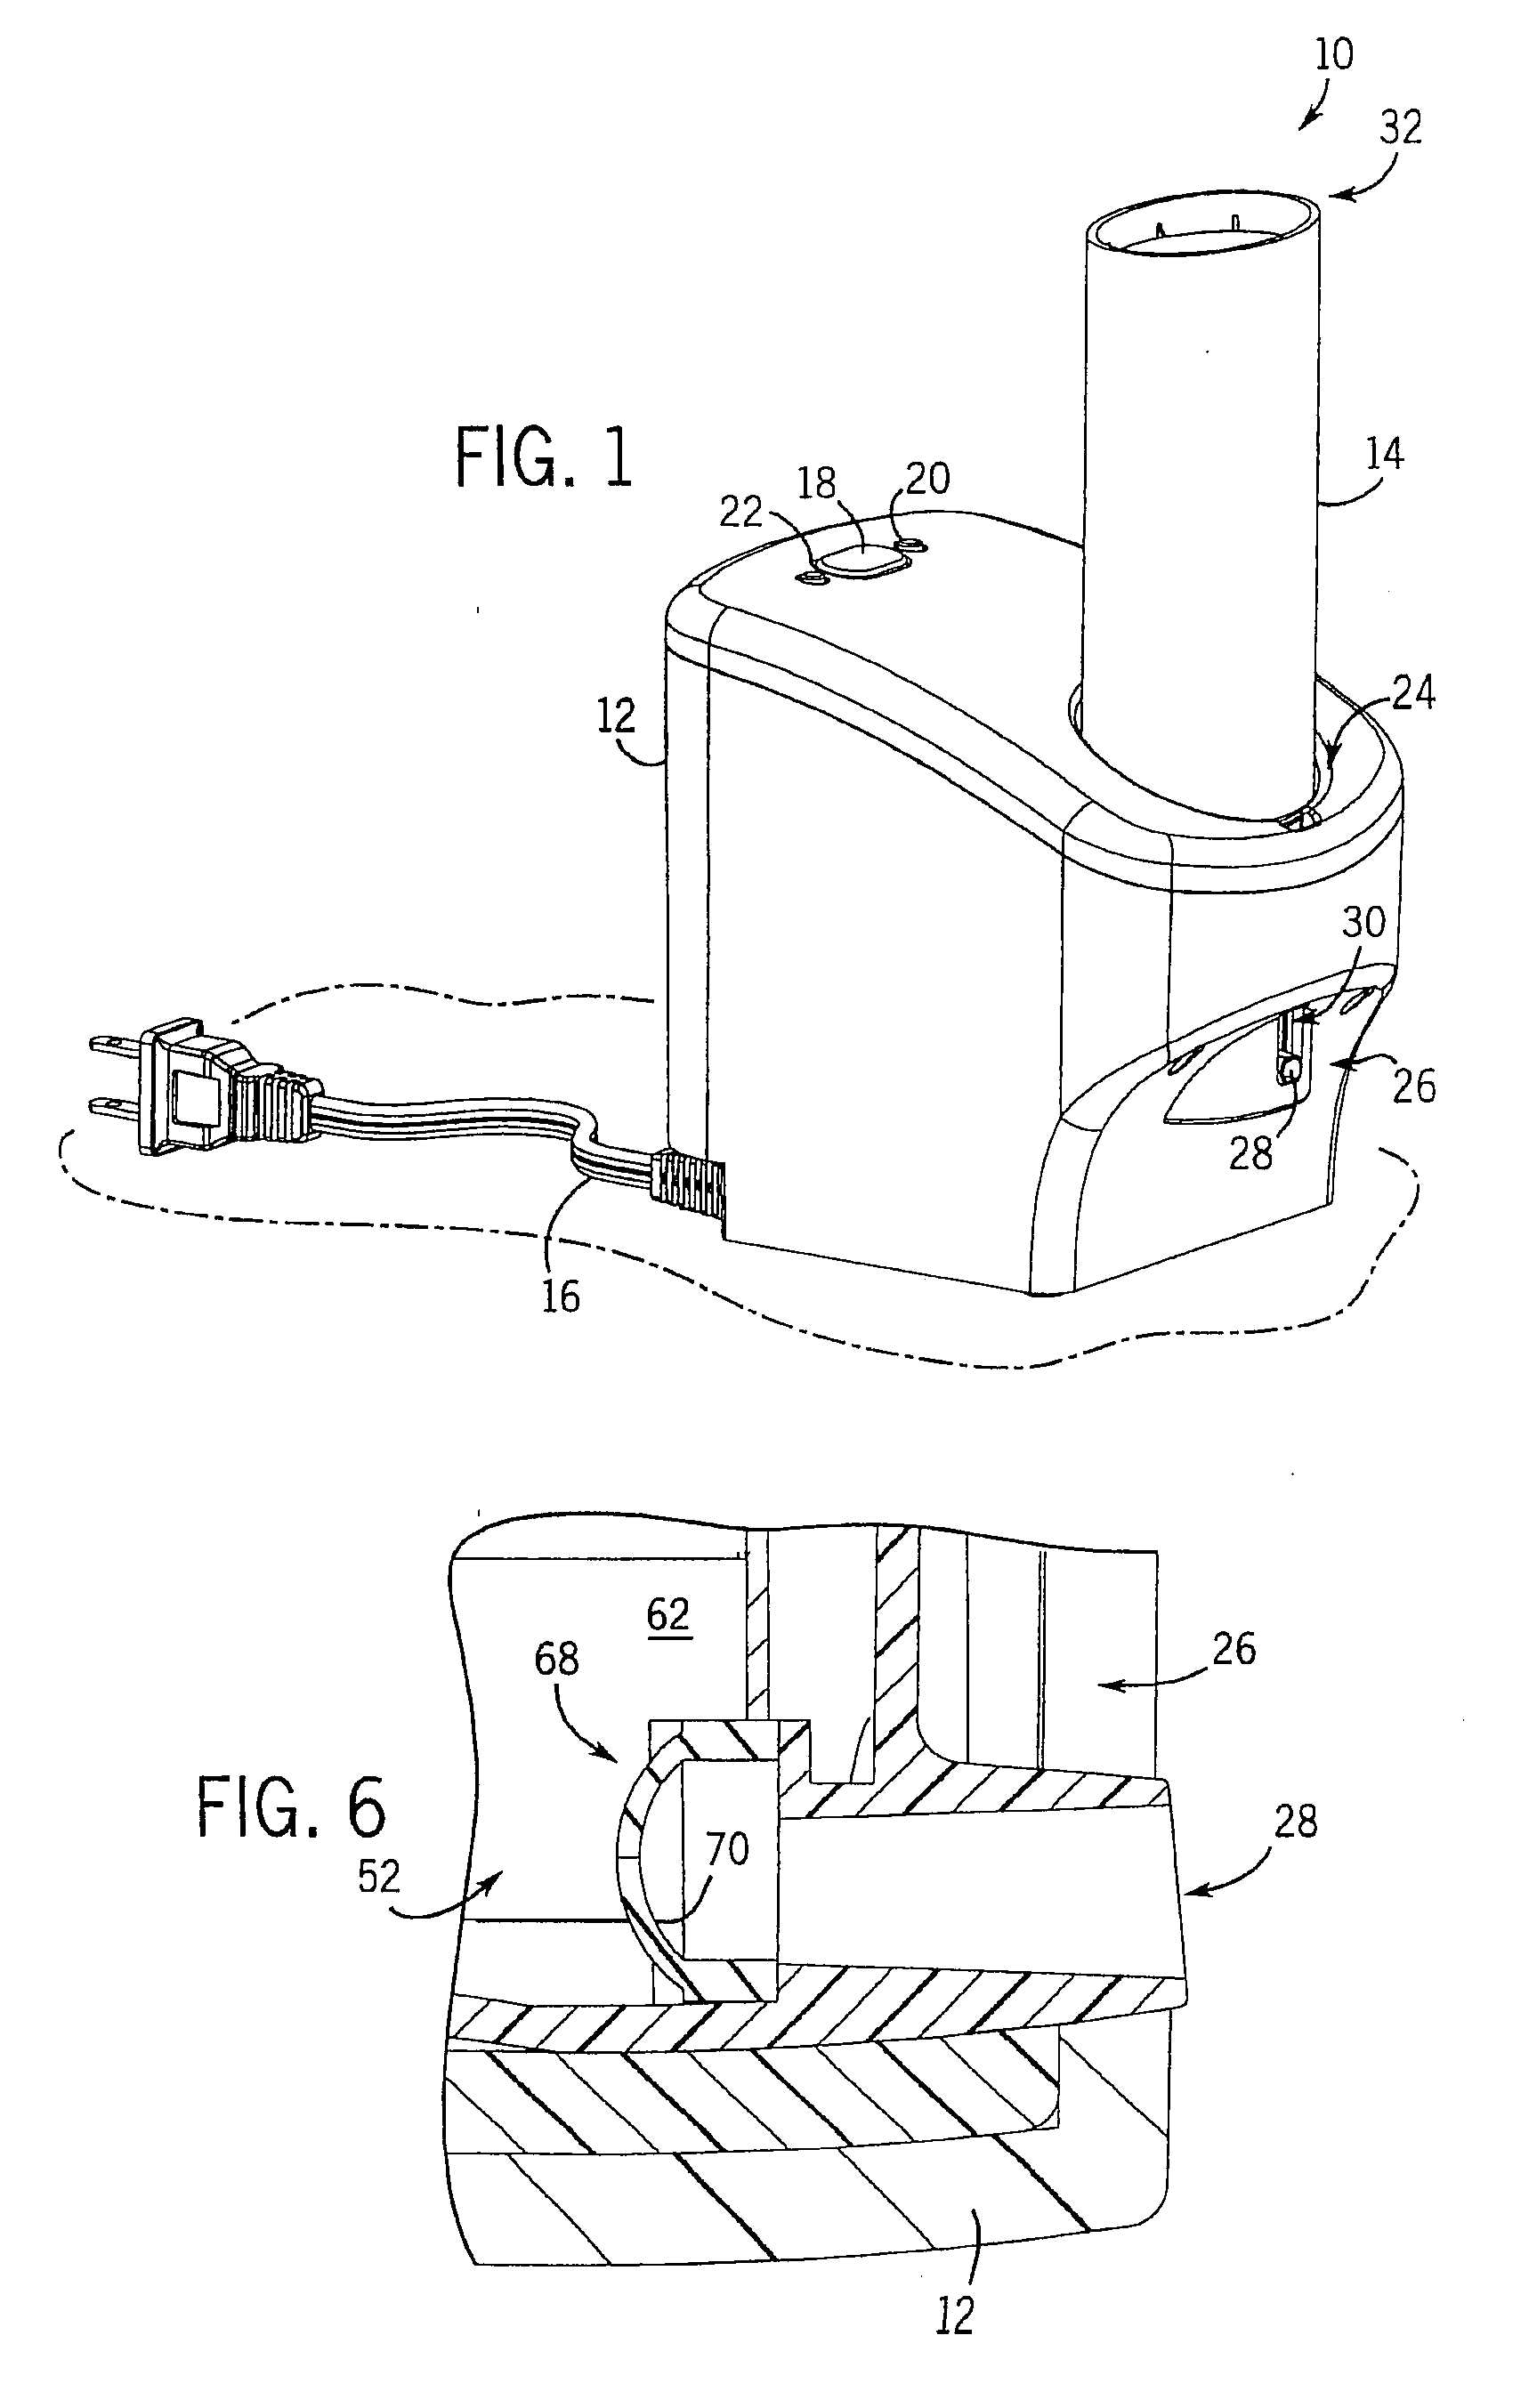 Heated flowable product dispenser